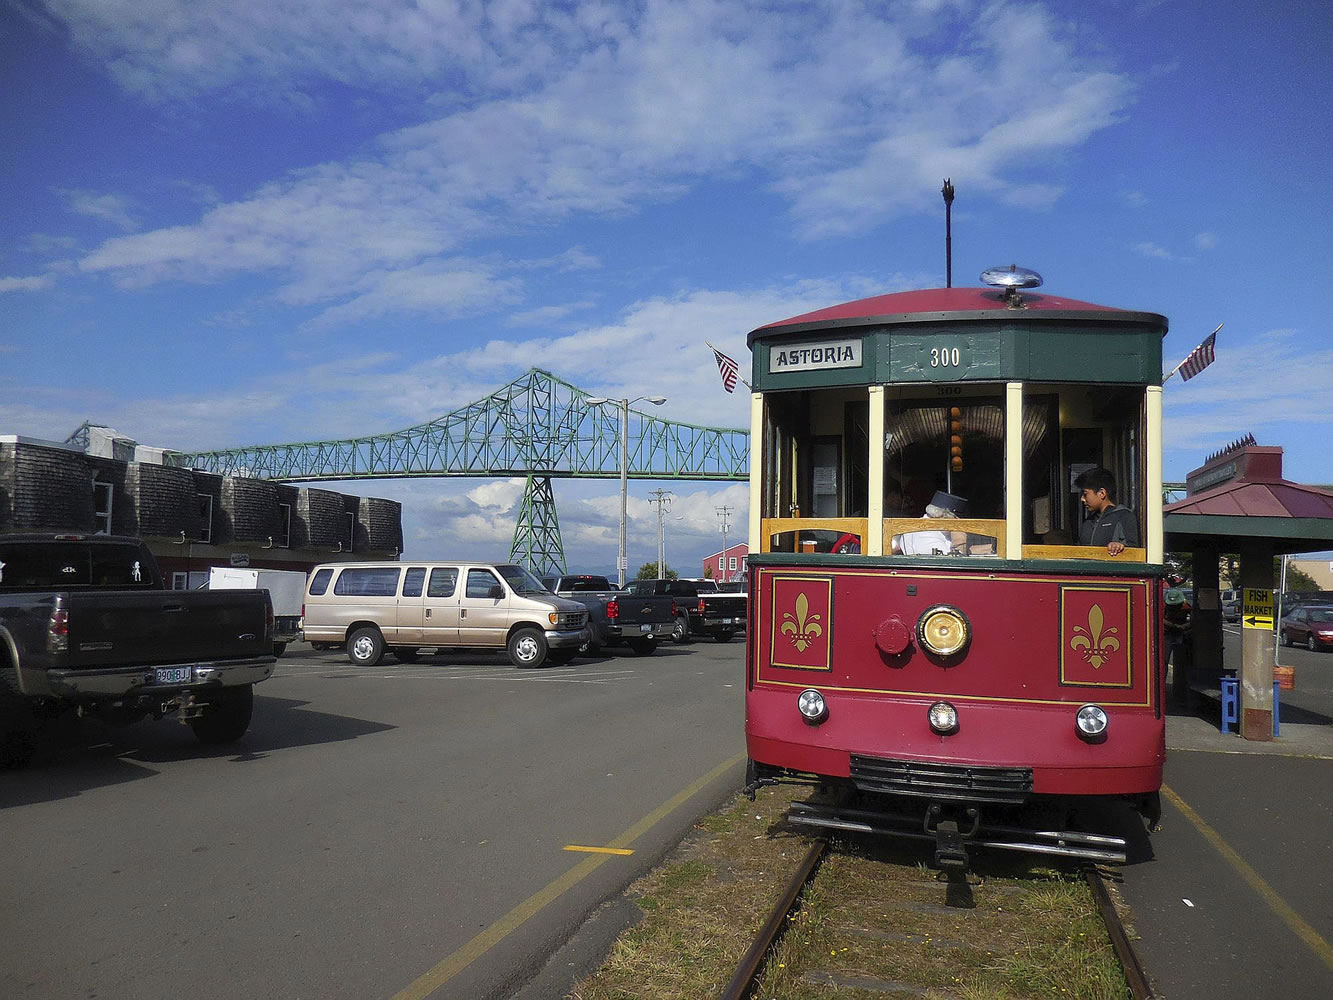 Rob Owen/Pittsburgh Post-Gazette
A 1913 trolley travels along Astoria's riverfront, zipping between canneries and past barking sea lions.